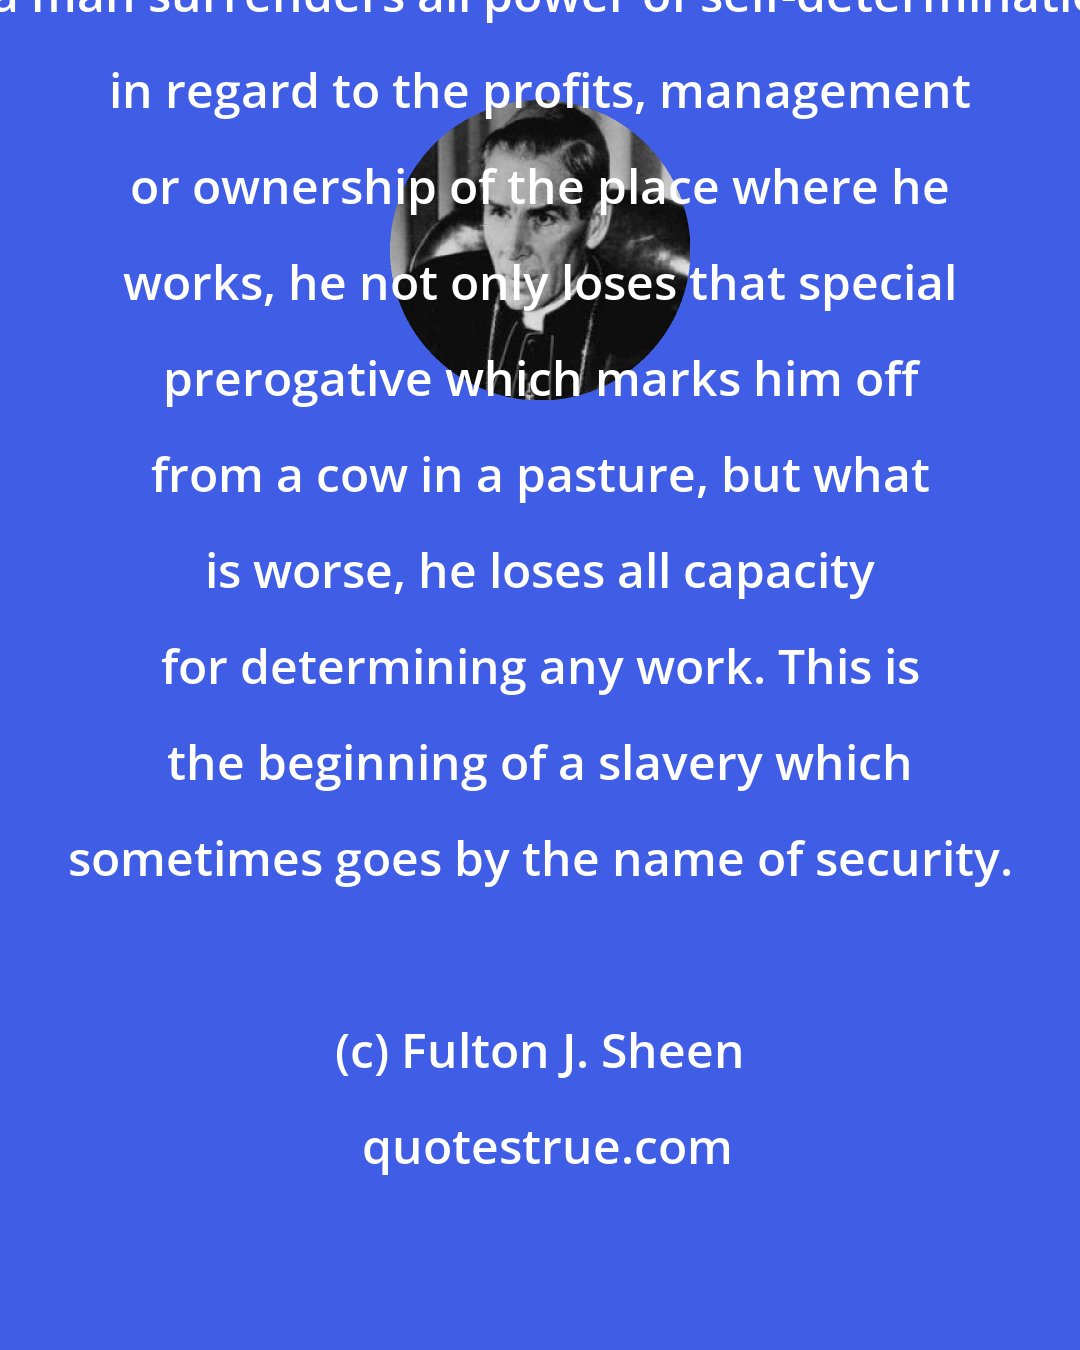 Fulton J. Sheen: If a man surrenders all power of self-determination in regard to the profits, management or ownership of the place where he works, he not only loses that special prerogative which marks him off from a cow in a pasture, but what is worse, he loses all capacity for determining any work. This is the beginning of a slavery which sometimes goes by the name of security.